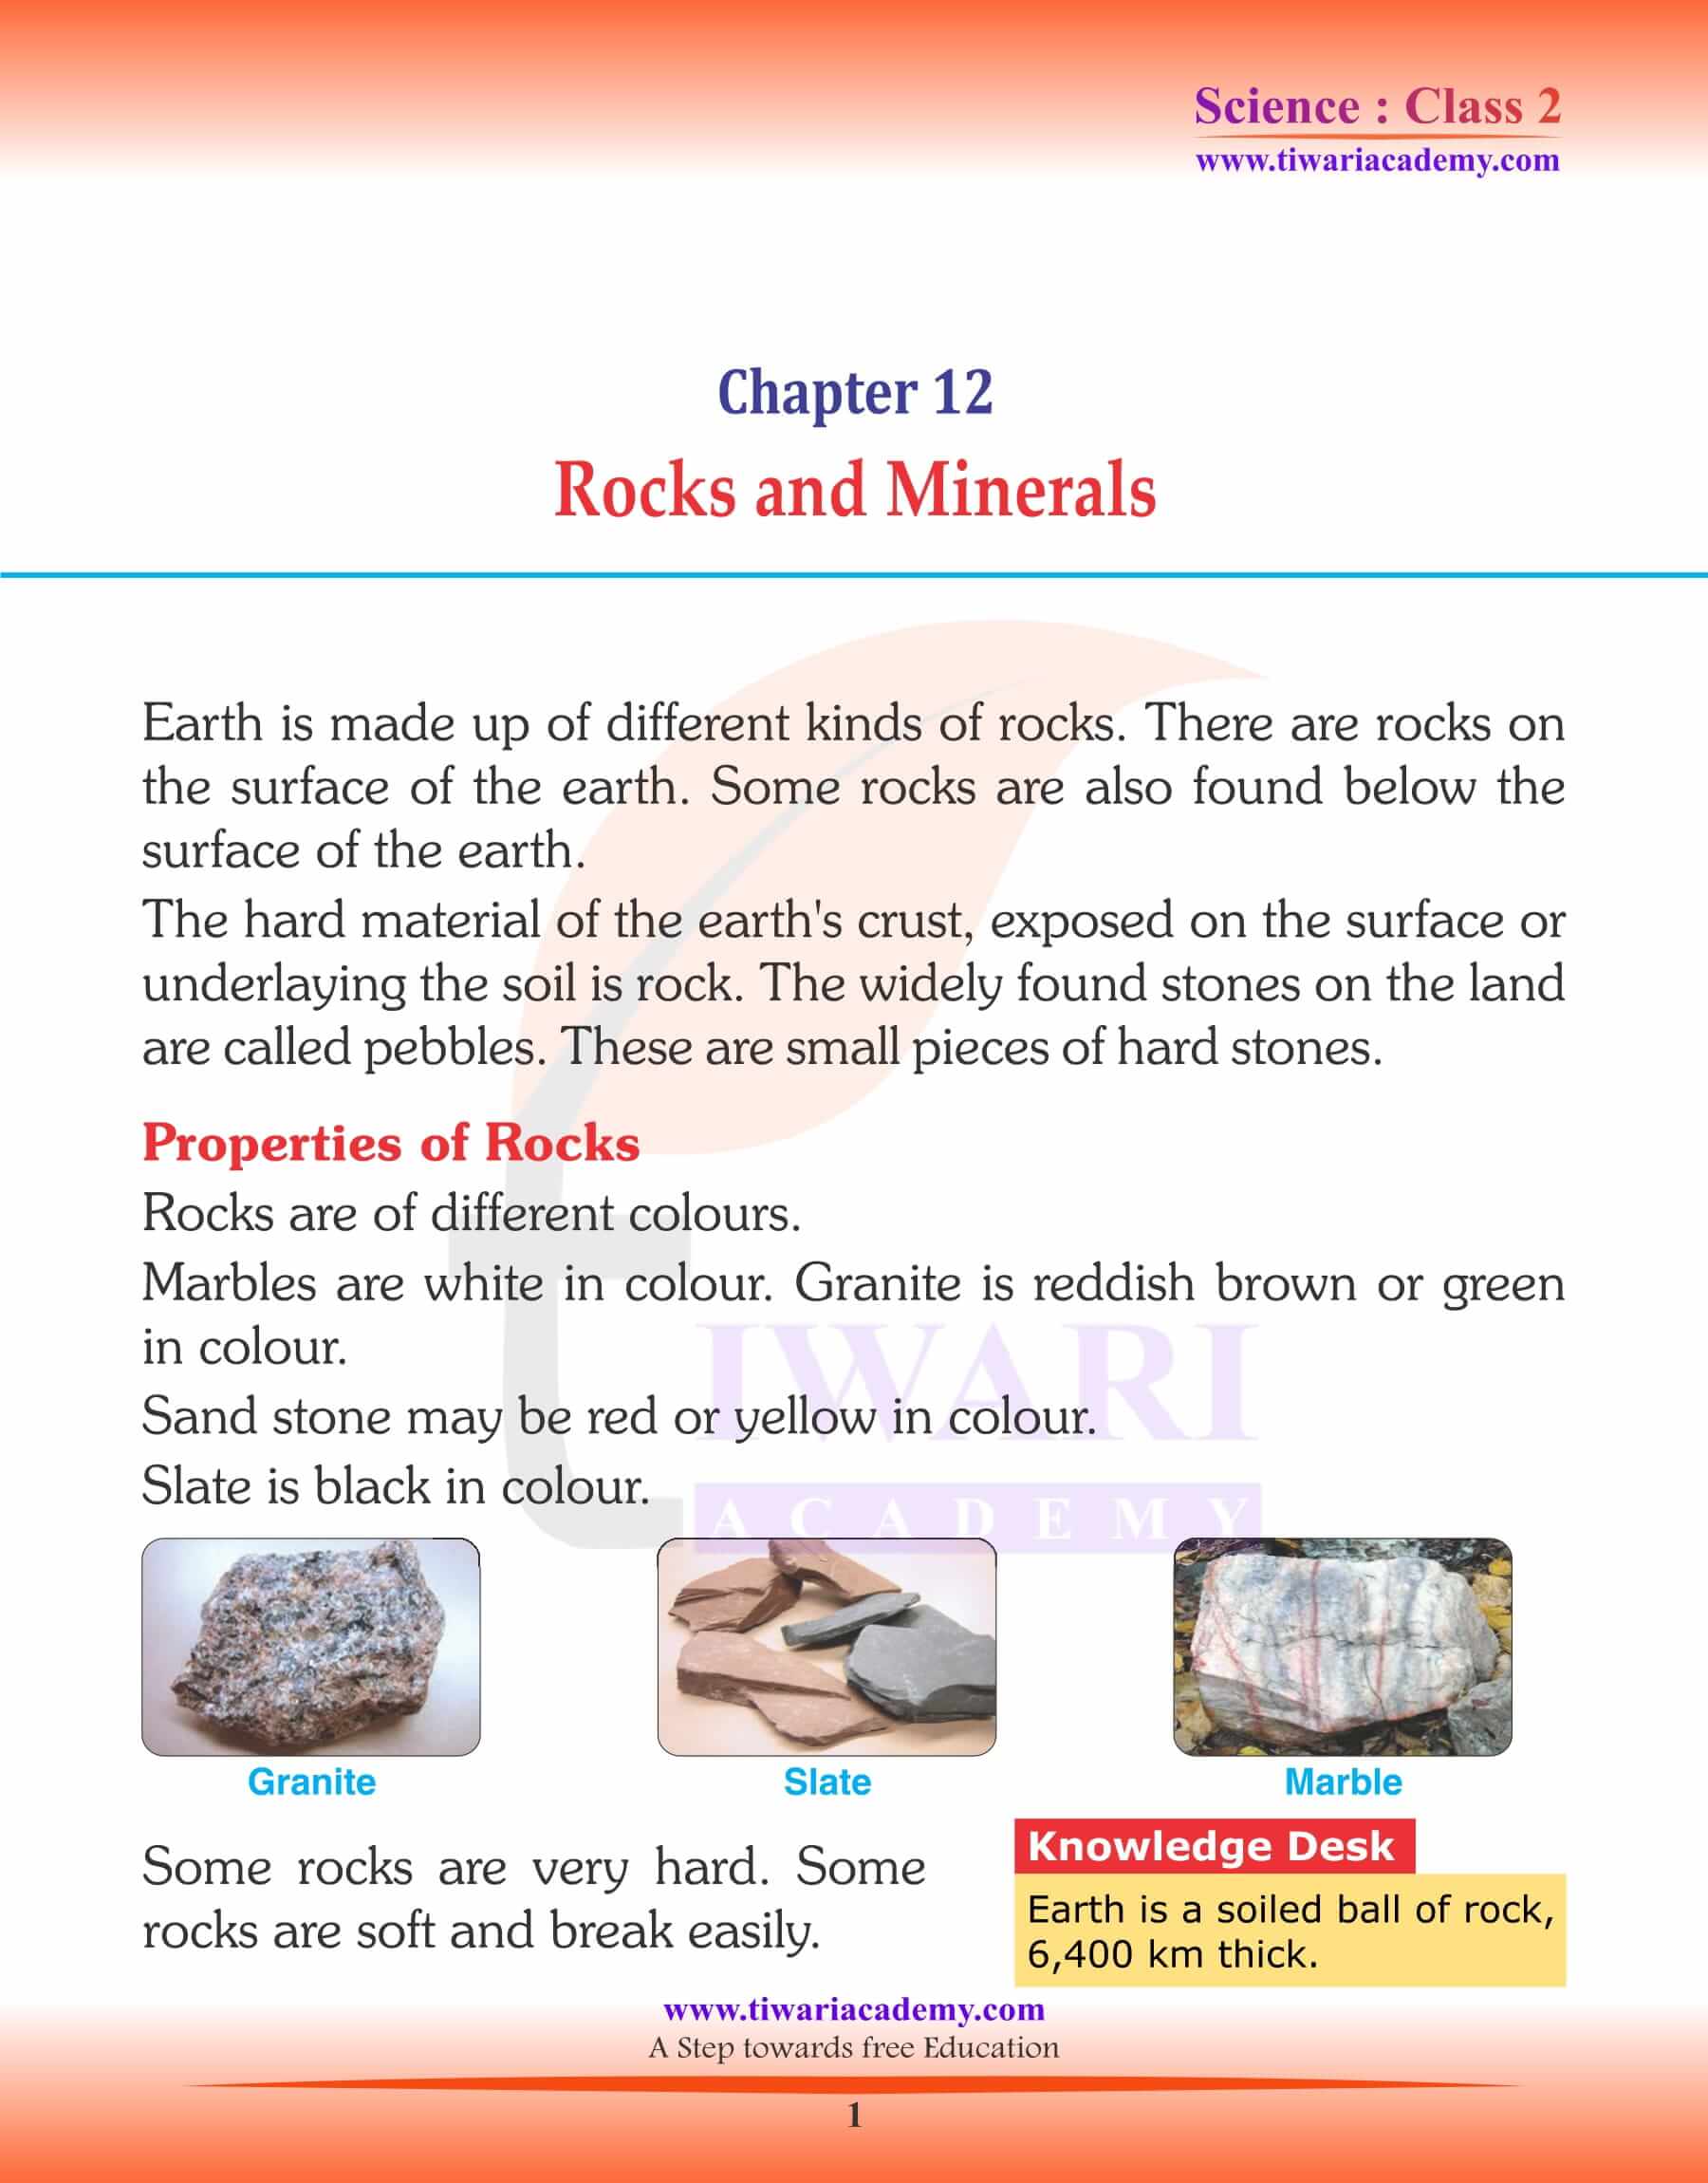 NCERT Solutions for Class 2 Science Chapter 12 Rocks and Minerals